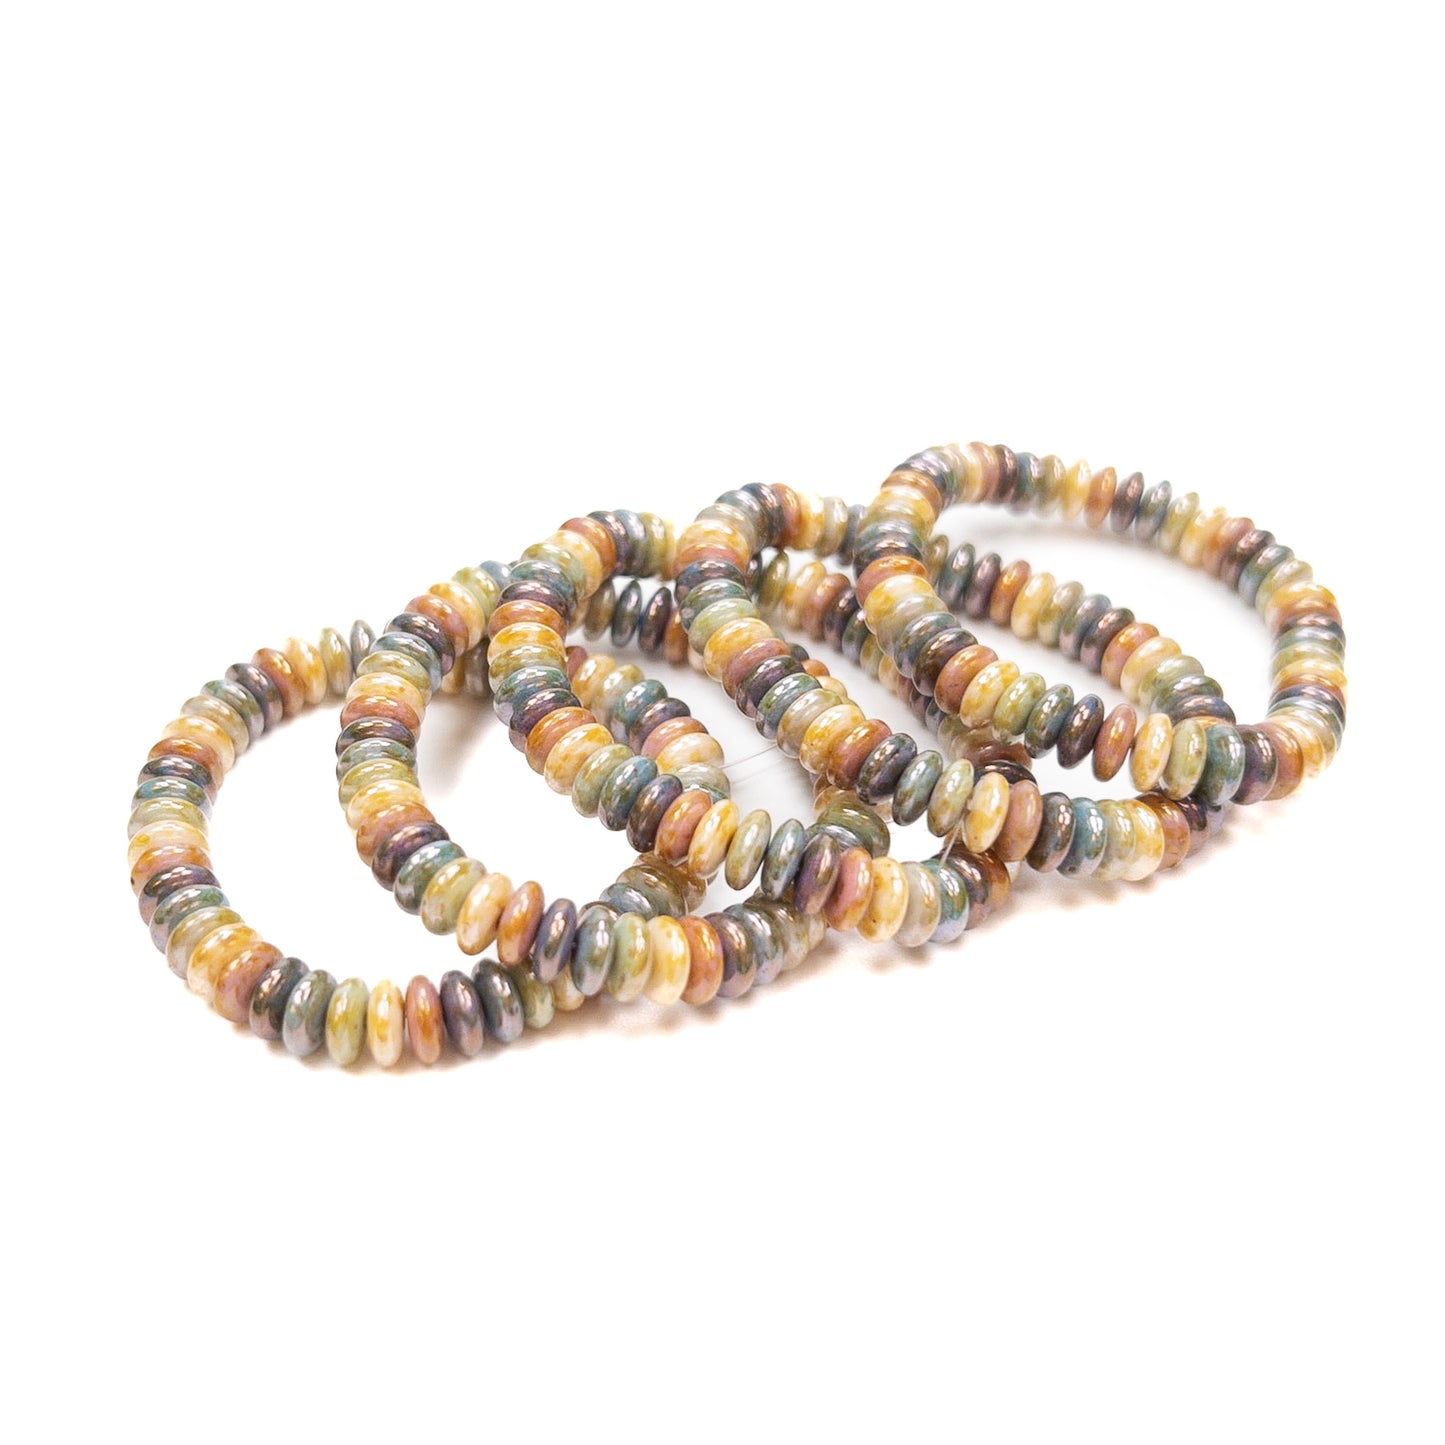 Opaque Stone Finish Rainbow Mix 6mm Disk Spacer Glass Bead - 50 pcs.